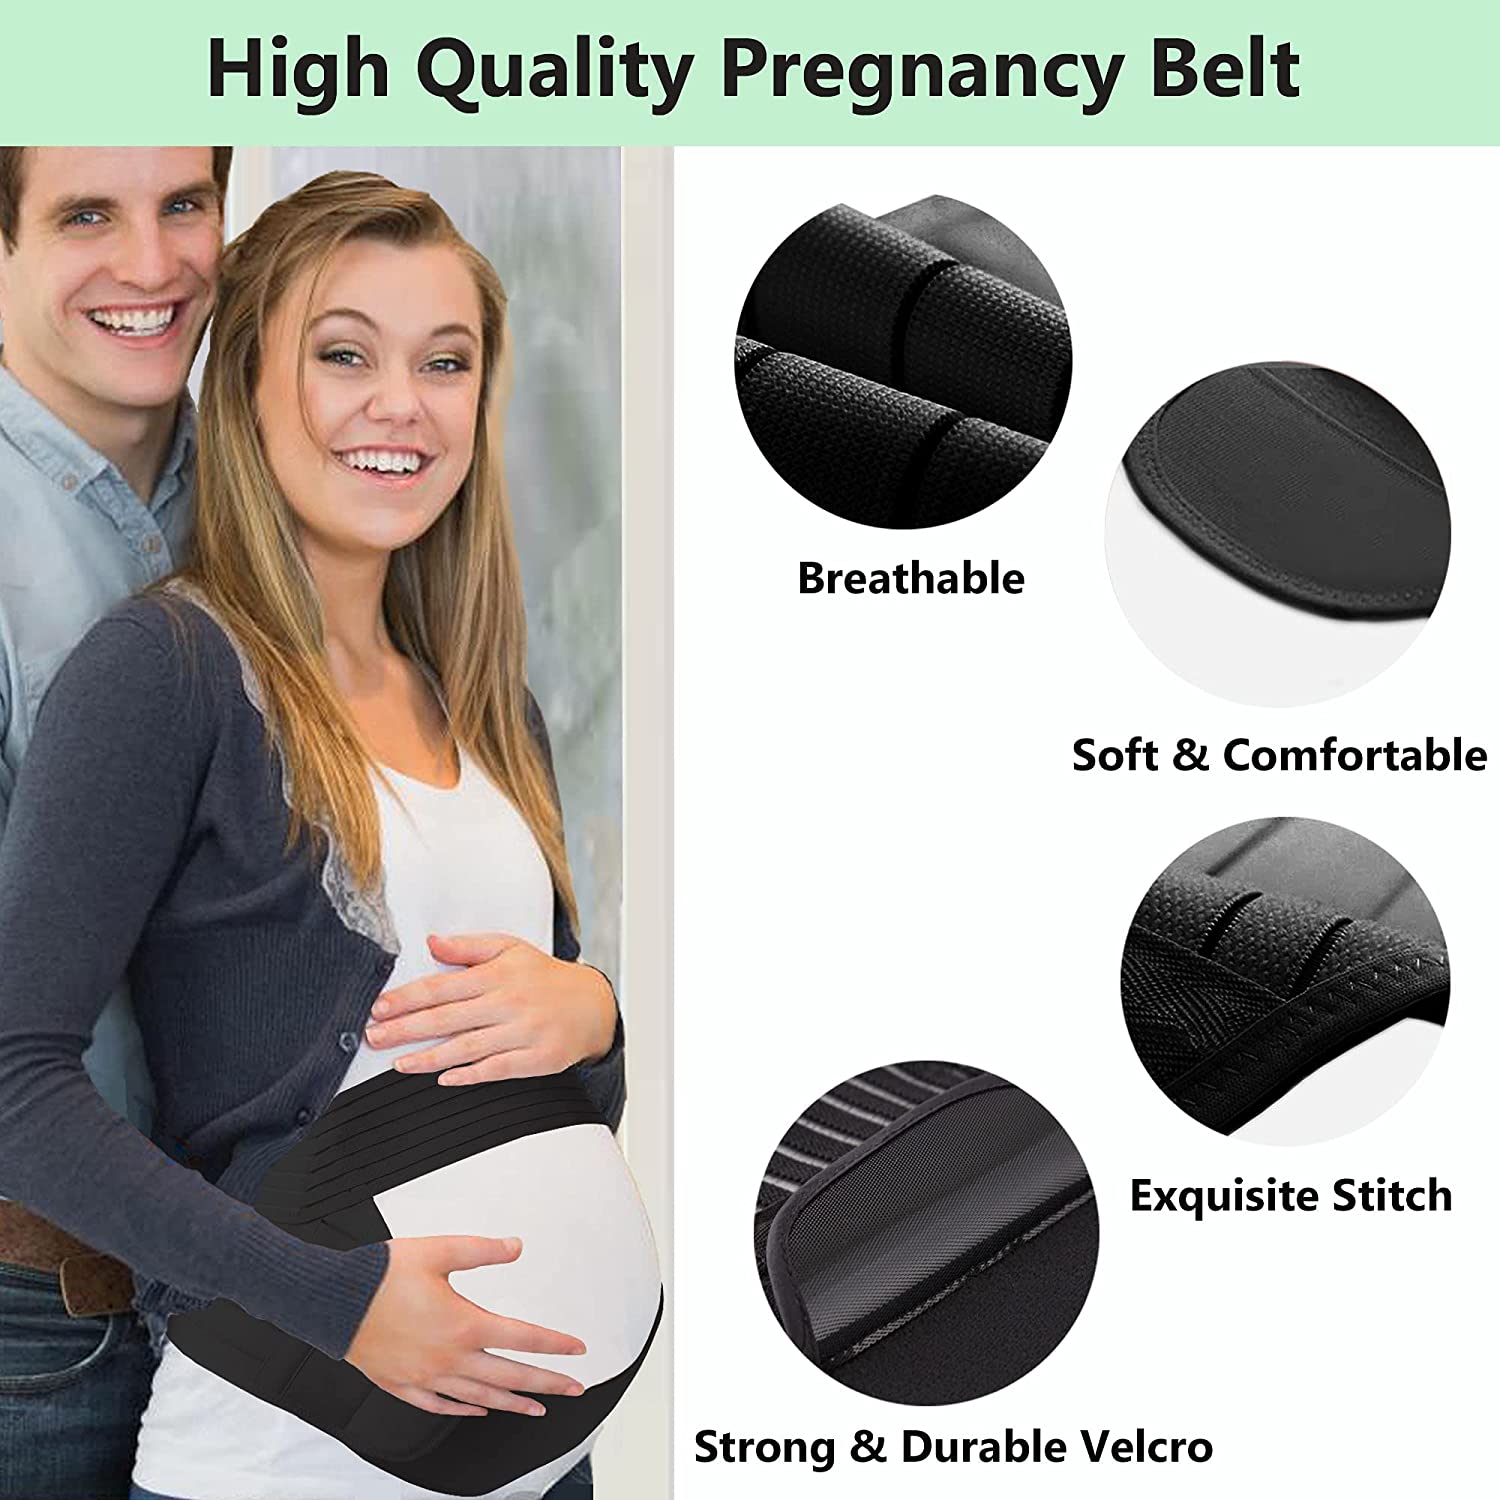 Ilfioreemio Pregnancy Belt, 3-in-1 Maternity Belt Pregnancy Support Band with Belly Band Brace for Pain Relief and Postpartum Recovery, Lightweight Breathable Adjustable Waist/Back/Abdomen Band - image 5 of 7